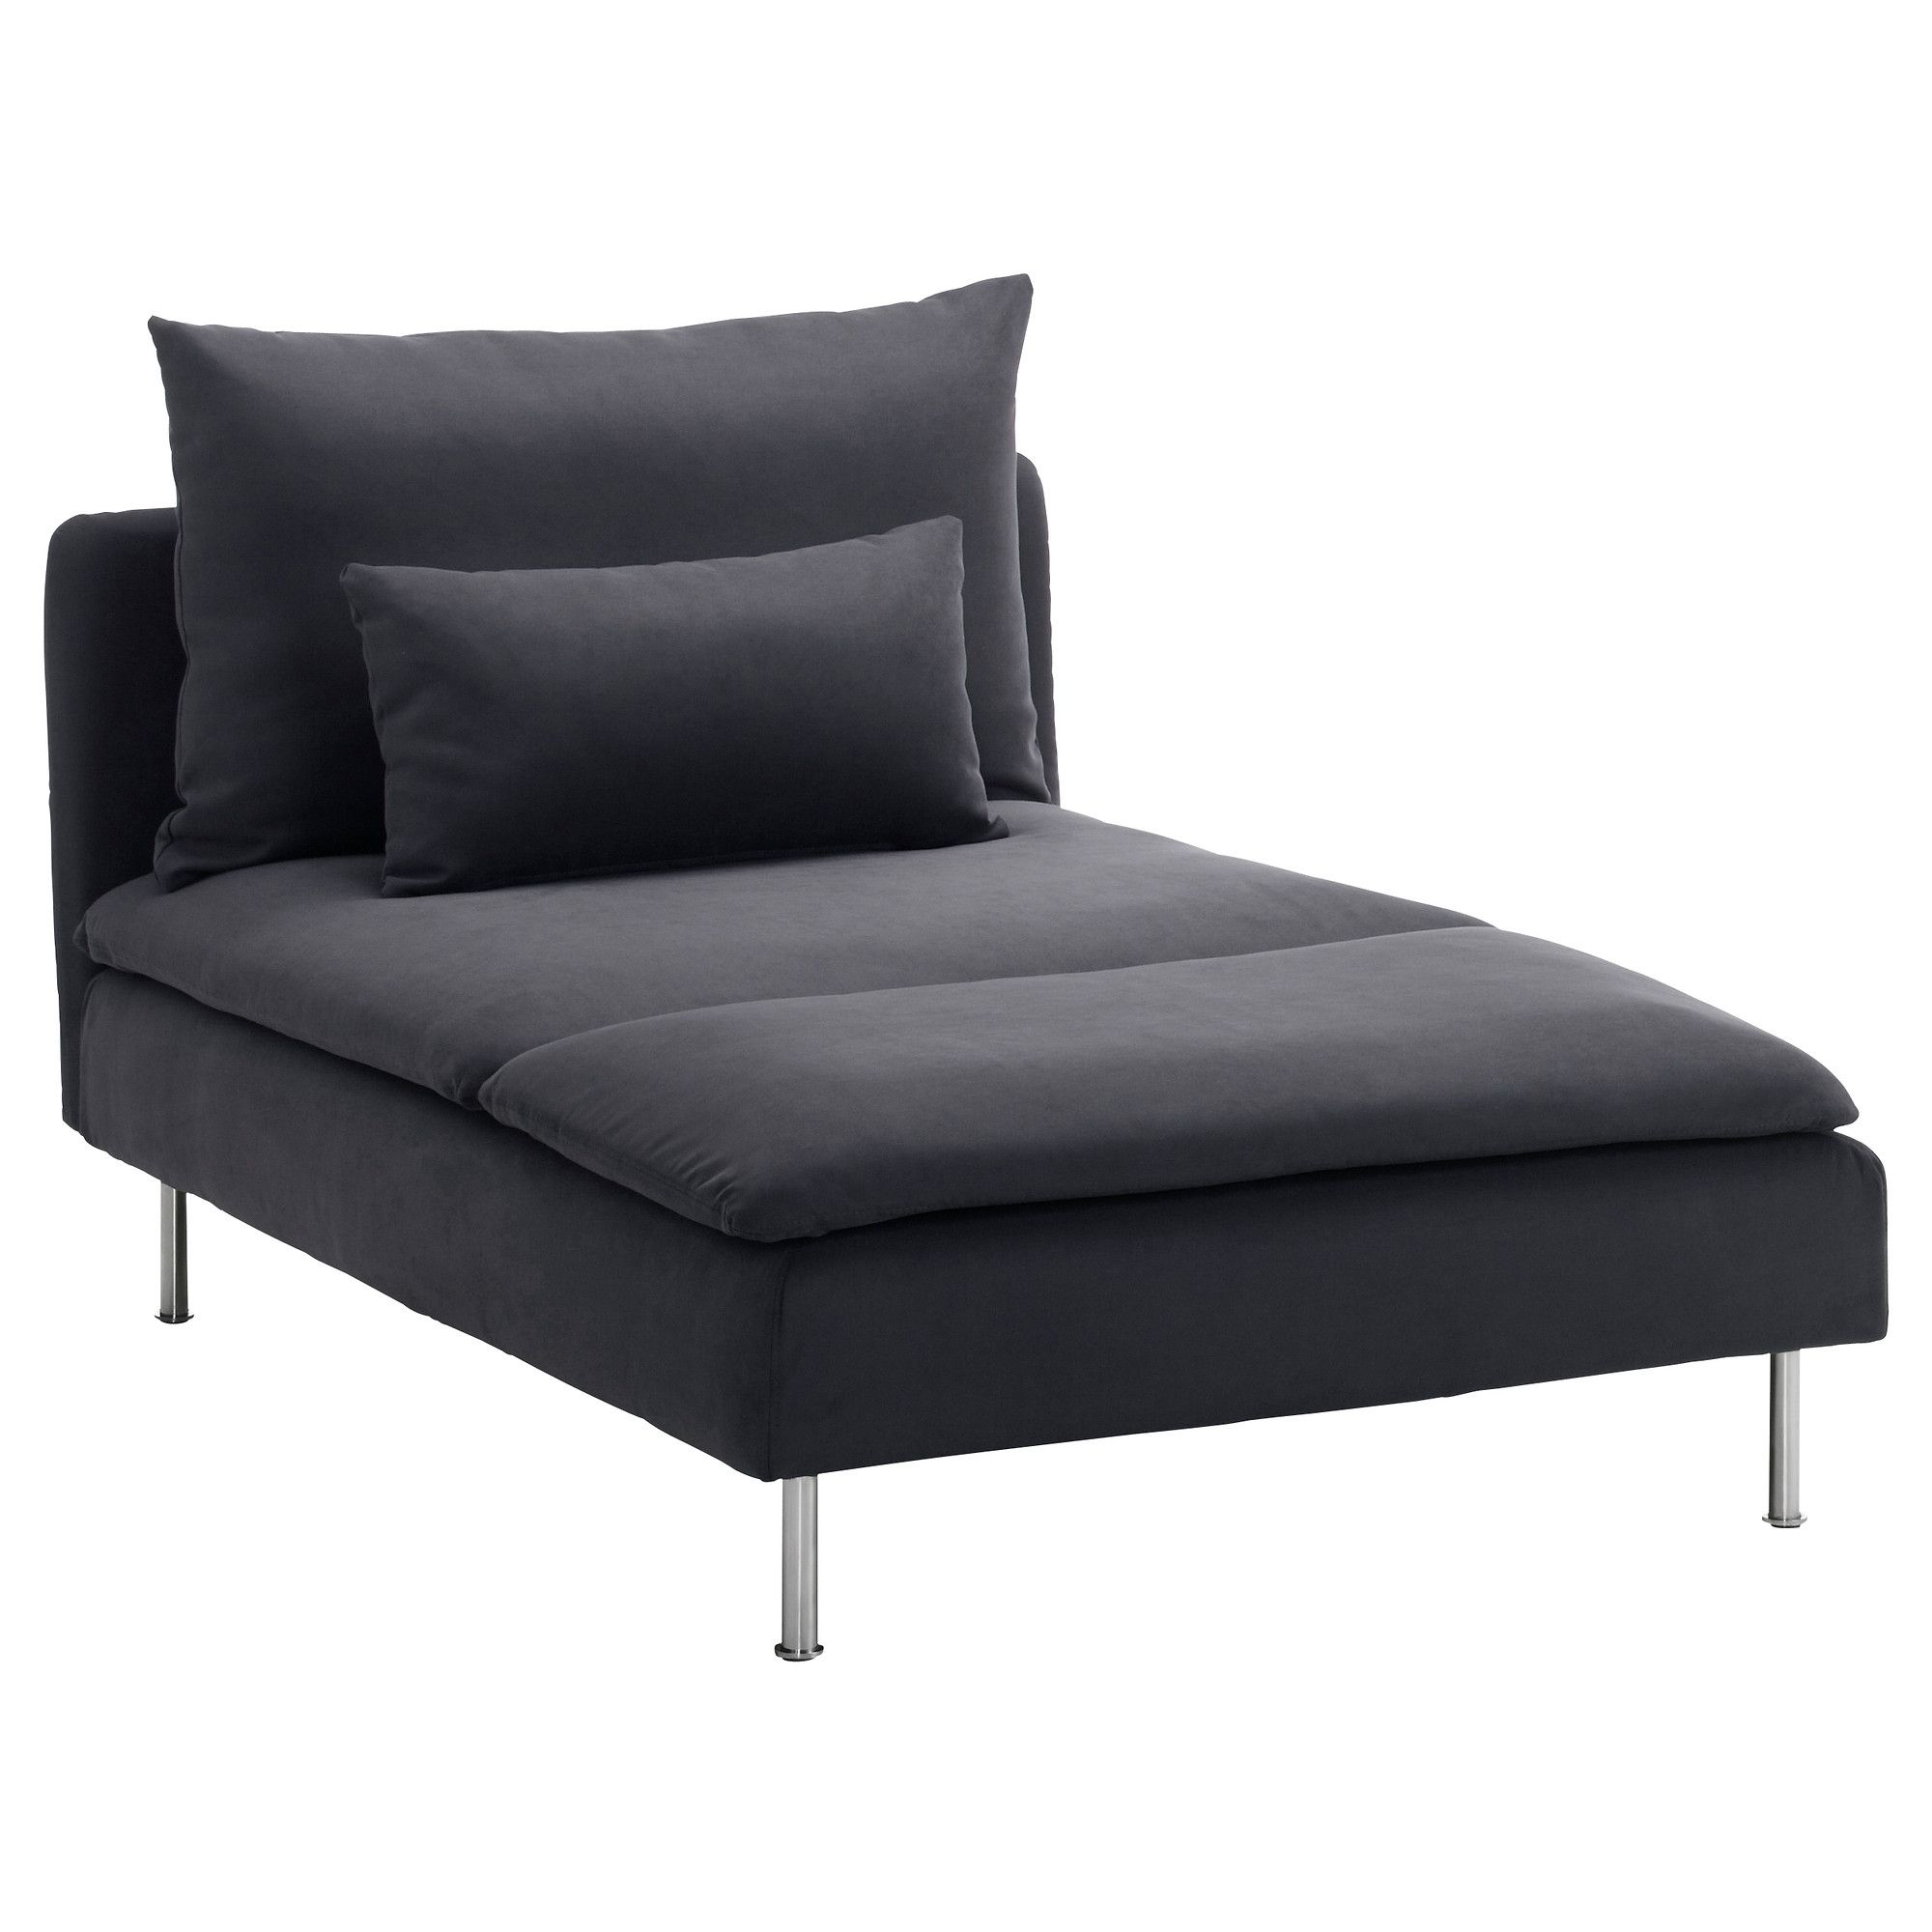 Widely Used Gray Chaises In Söderhamn Chaise – Samsta Dark Gray – Ikea (Photo 4 of 15)